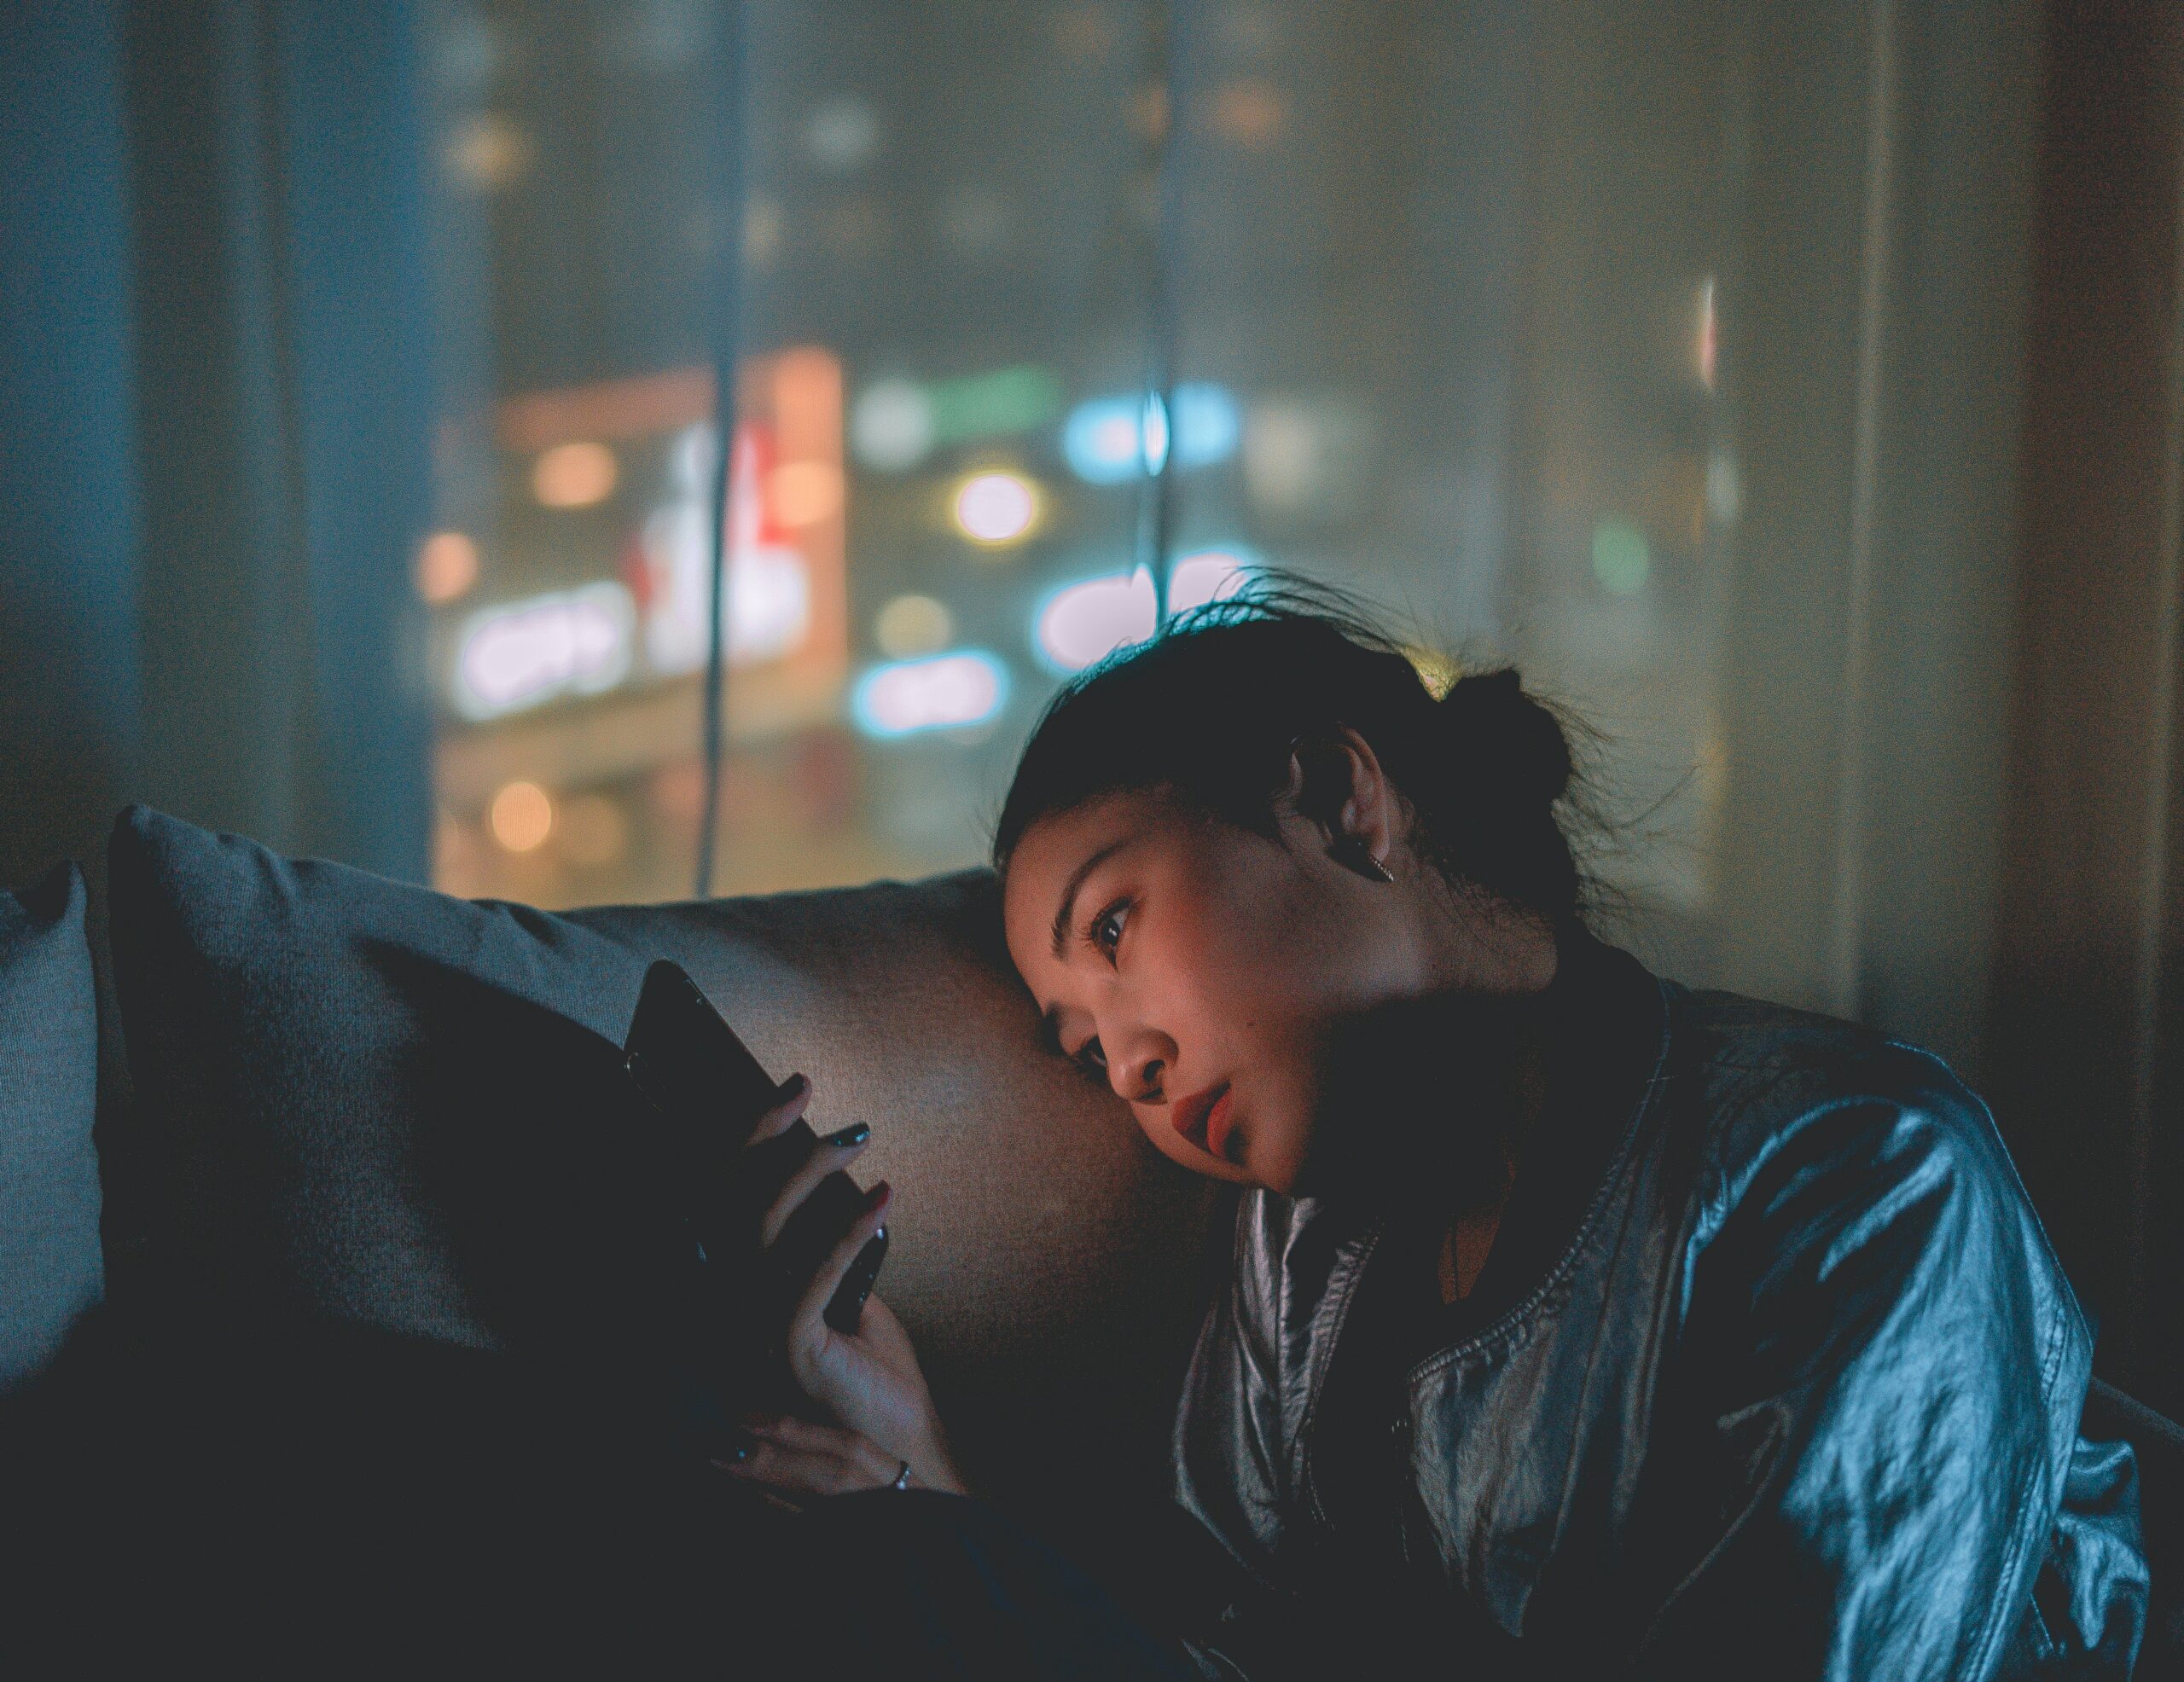 A woman is looking wistfully at her phone screen. The room is dimly-lit, and curtains behind her filter out some of the bright lights of the city. The mood of the photograph is very isolating.